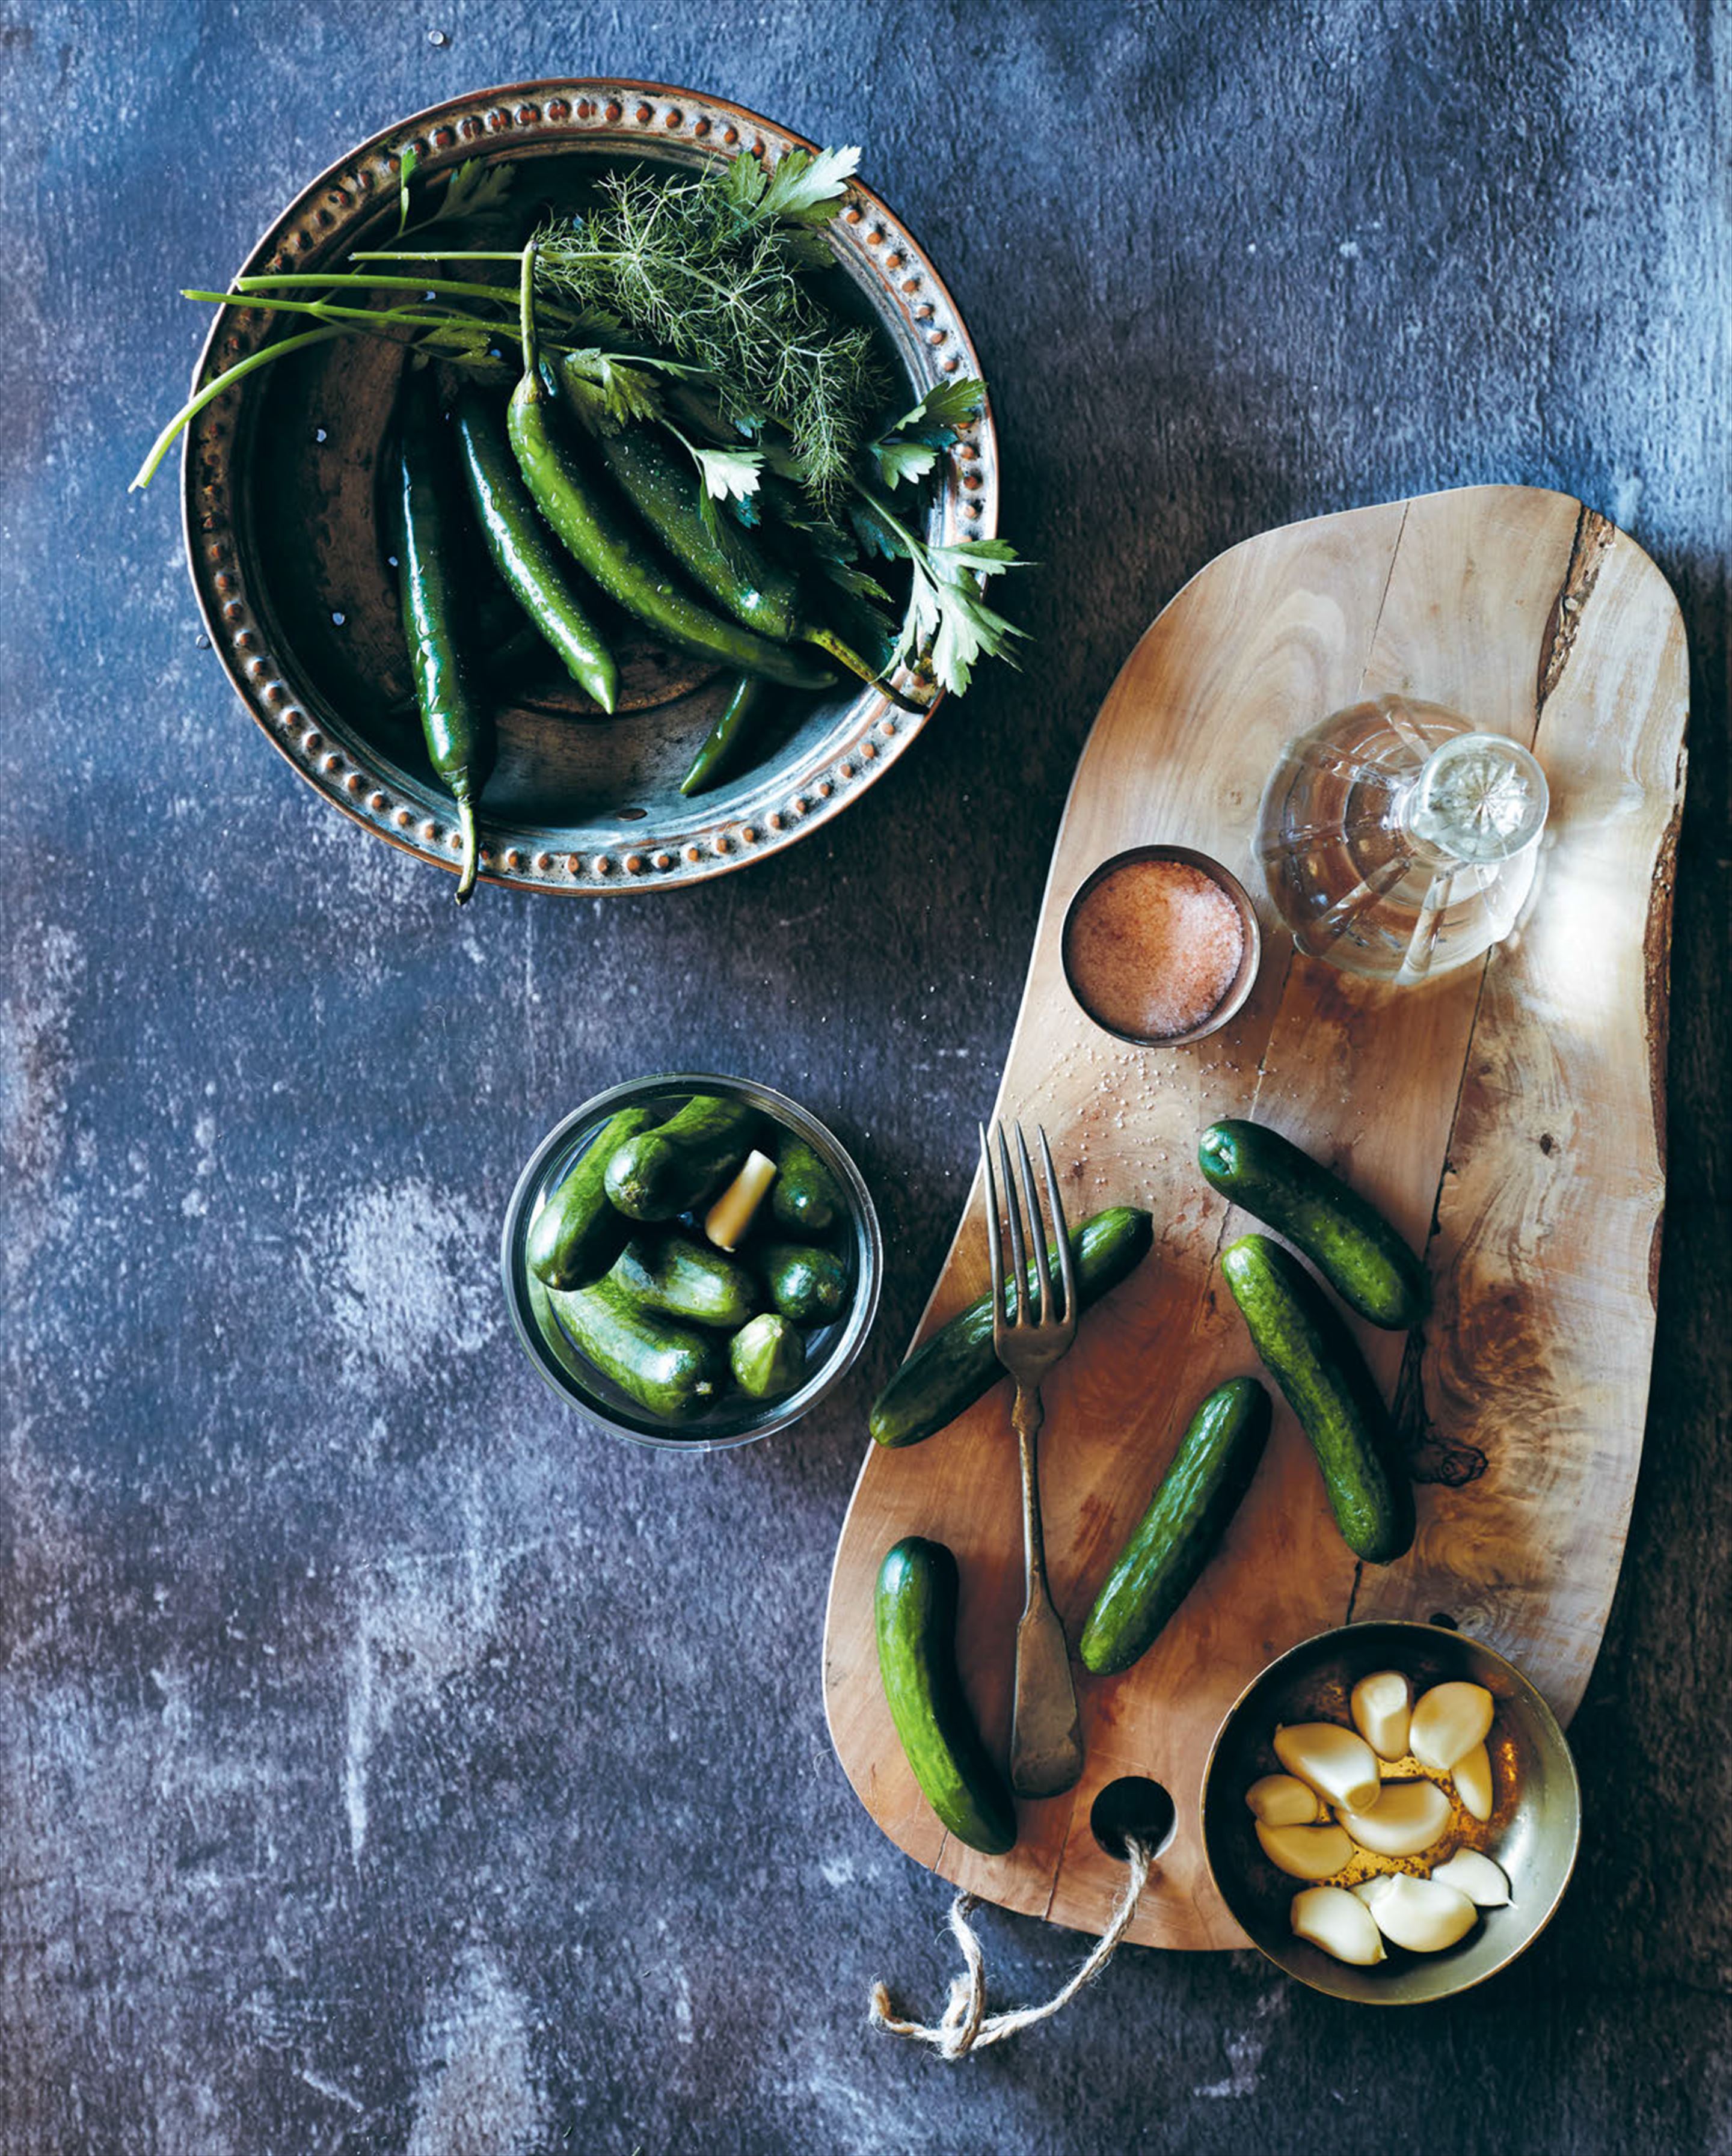 Pickled cucumbers & green chillies